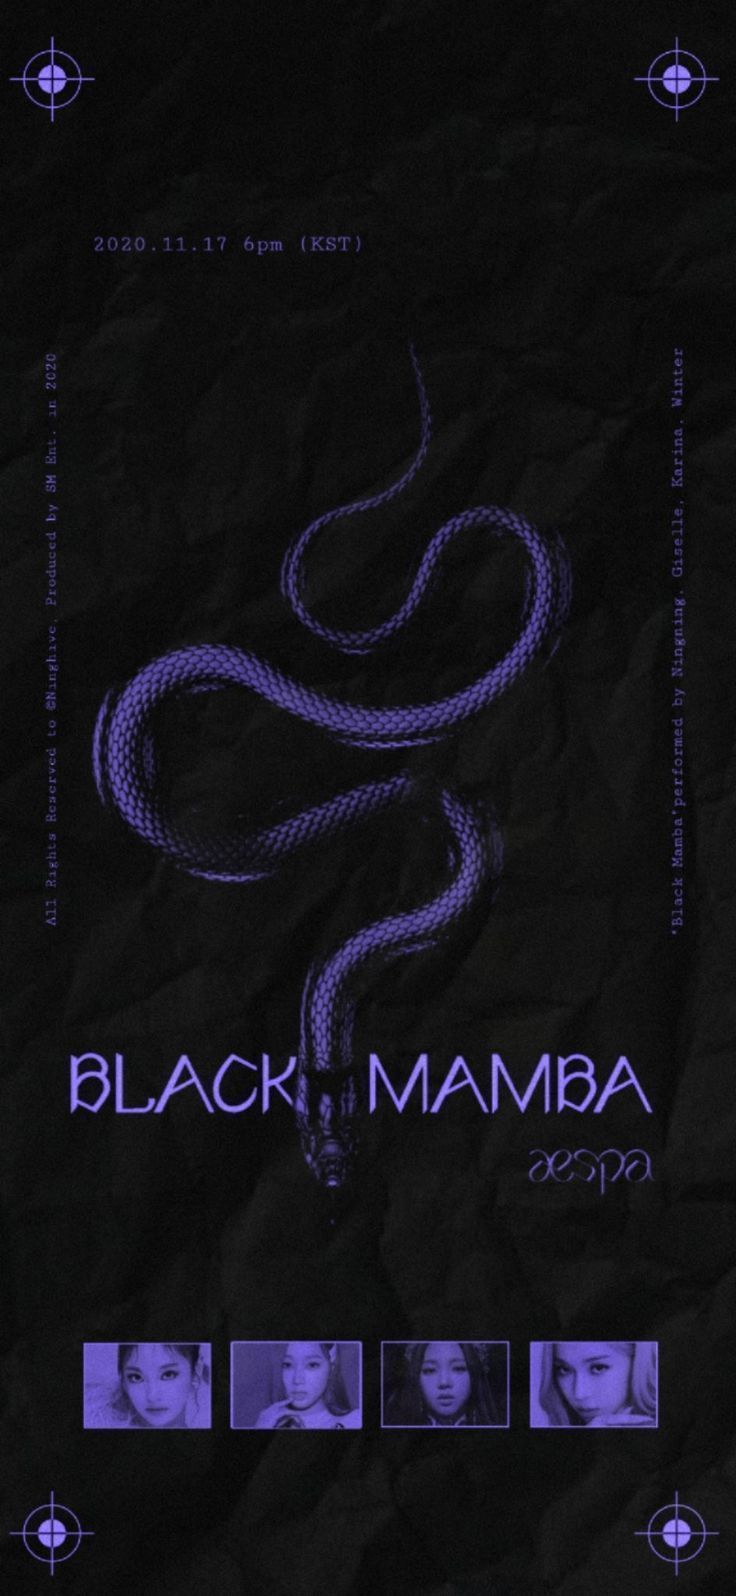 Black Mamba Aesthetic wallpaper by<ref> Black Mamba</ref><box>(116,211),(788,757)</box> Aesthetic wallpaper by me! I hope you like it! Let me know if you want me to make more - Aespa